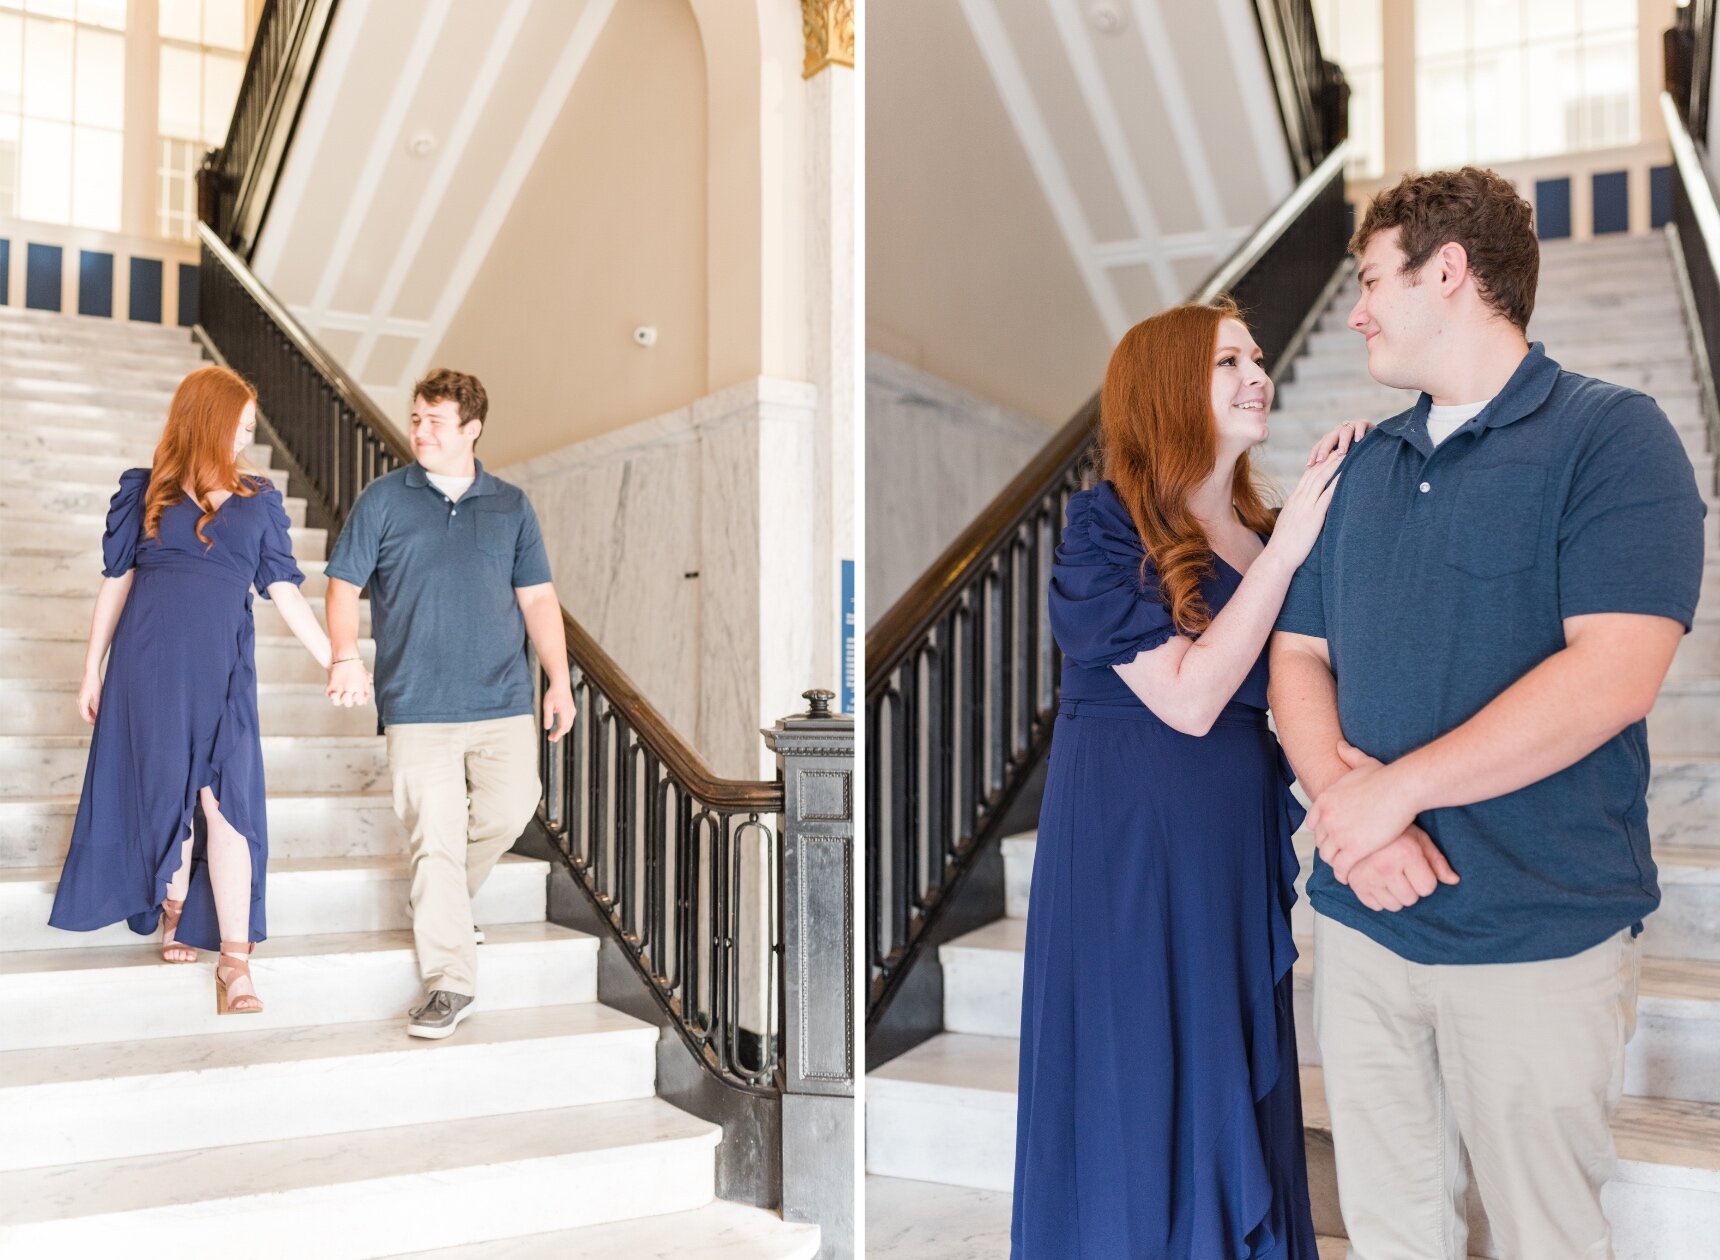 Downtown Mobile Alabama Engagement Session Photoshoot Photographed by Kristen Marcus Photography